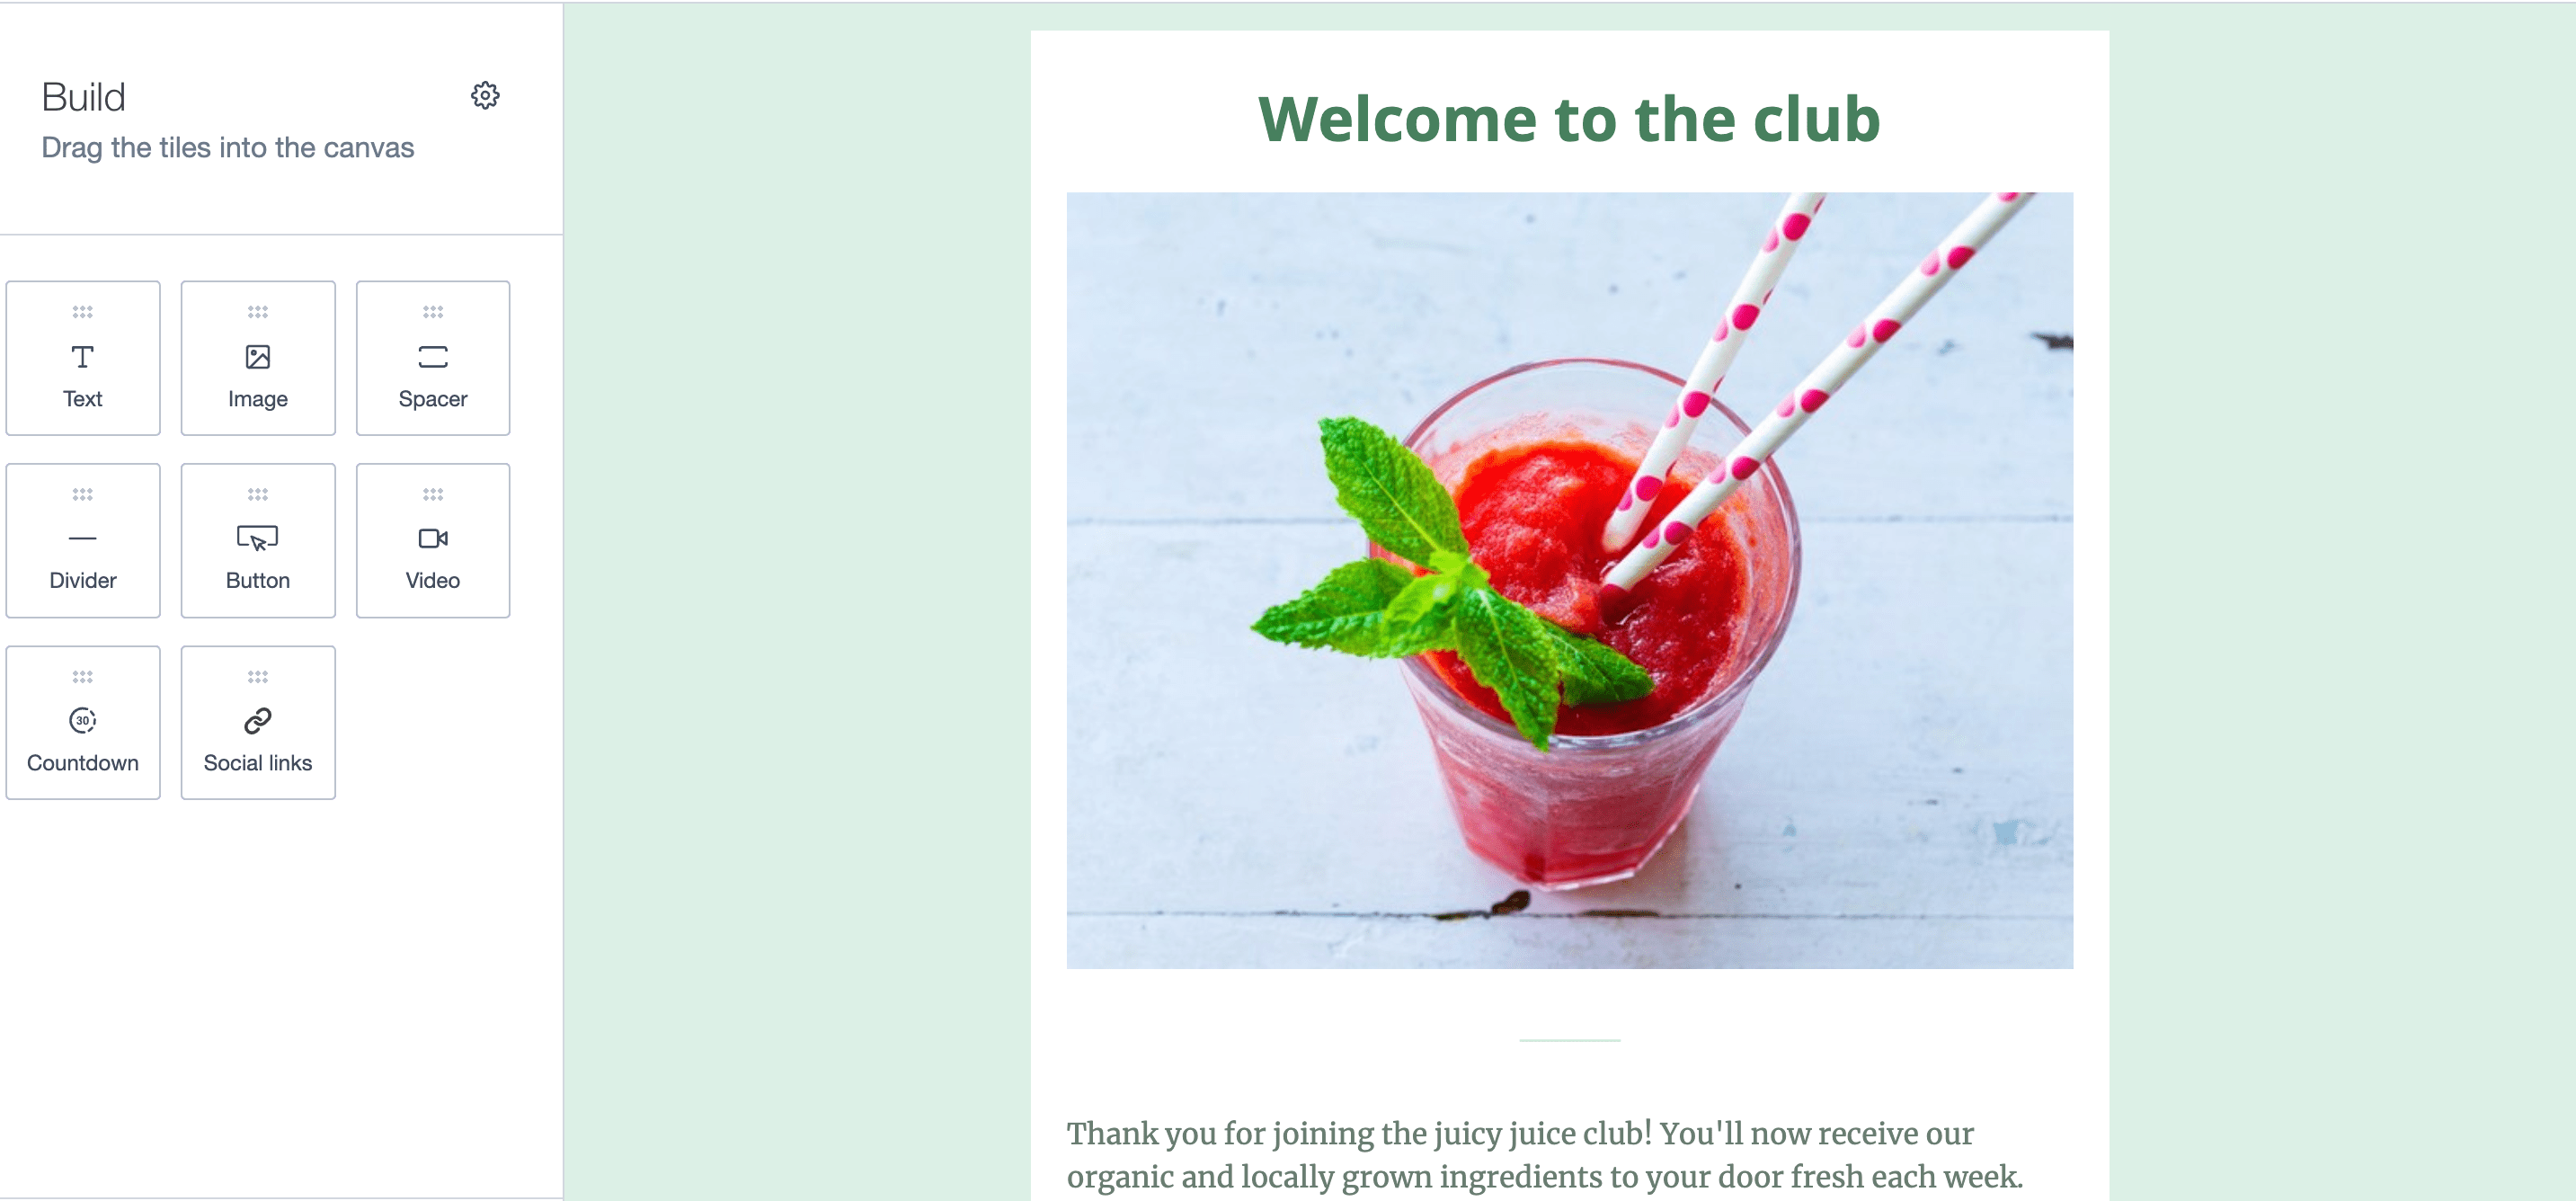 Welcome to the email marketing service club